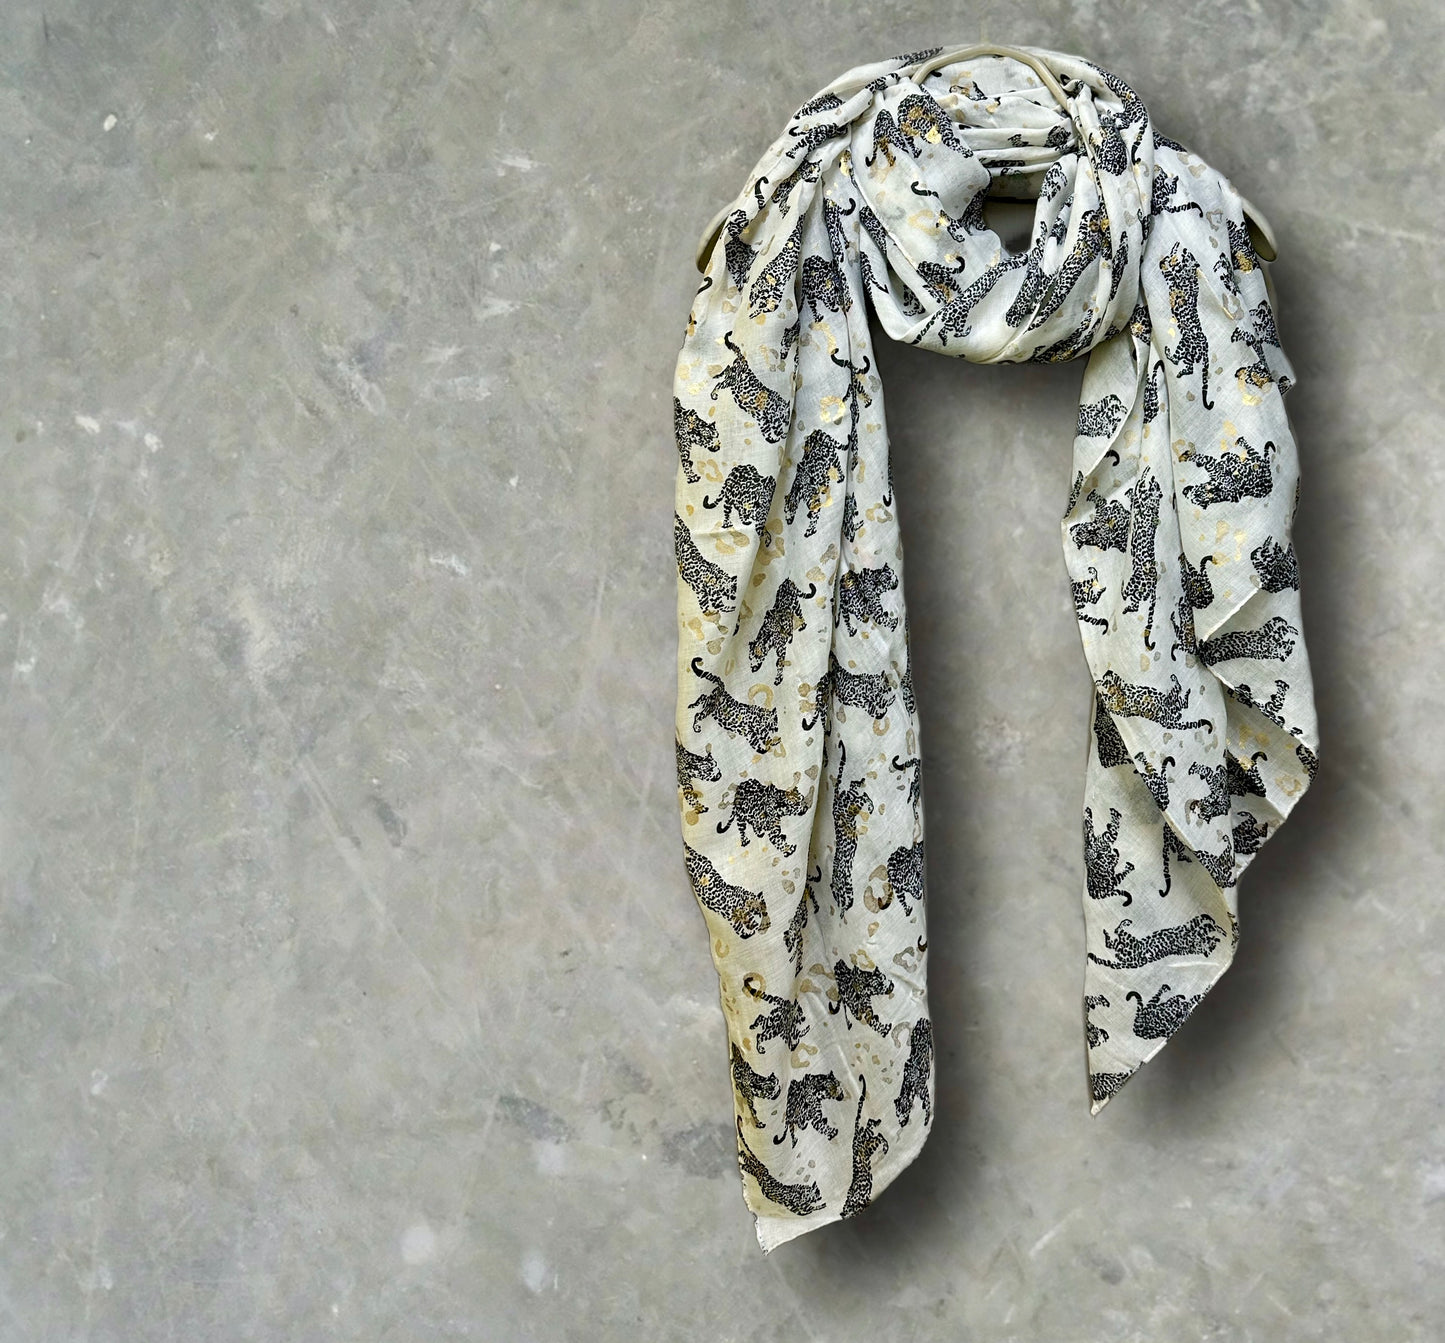 Black classic leopards print off white scarf for women,perfect for any season and great gifts for her,mother,birthday and Christmas